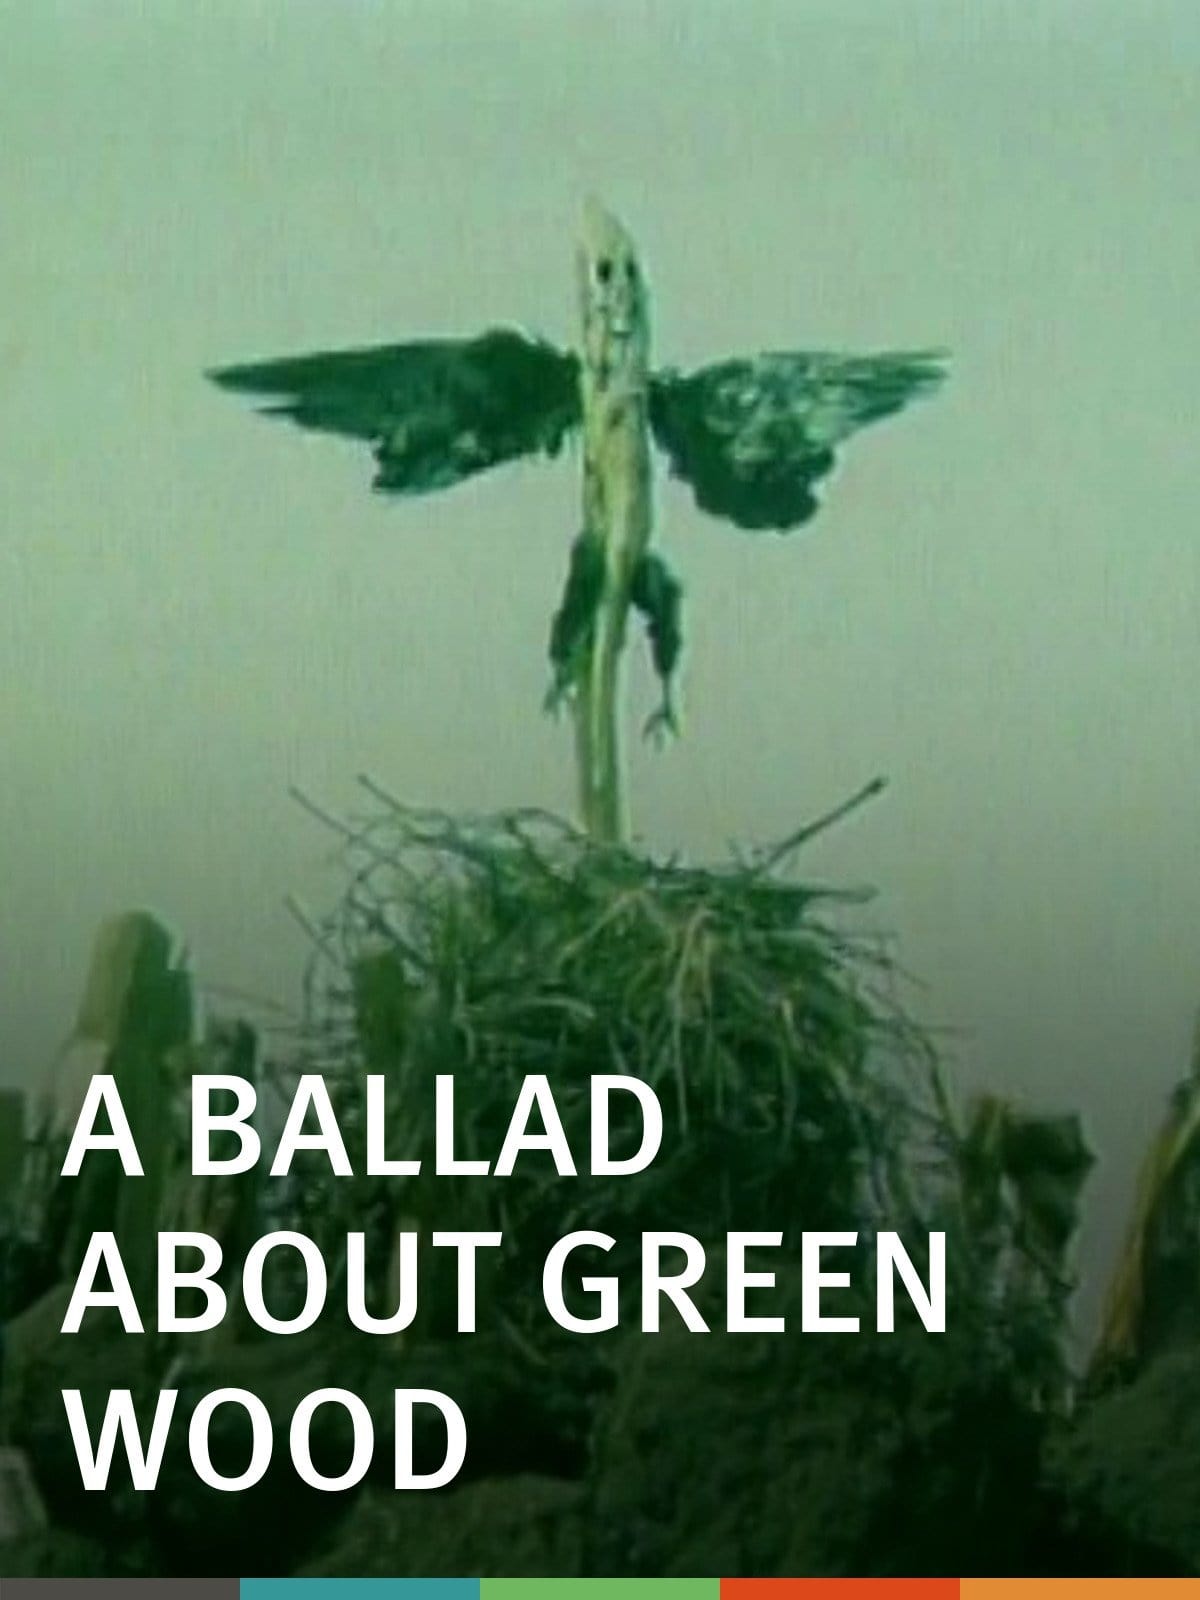 A Ballad About Green Wood